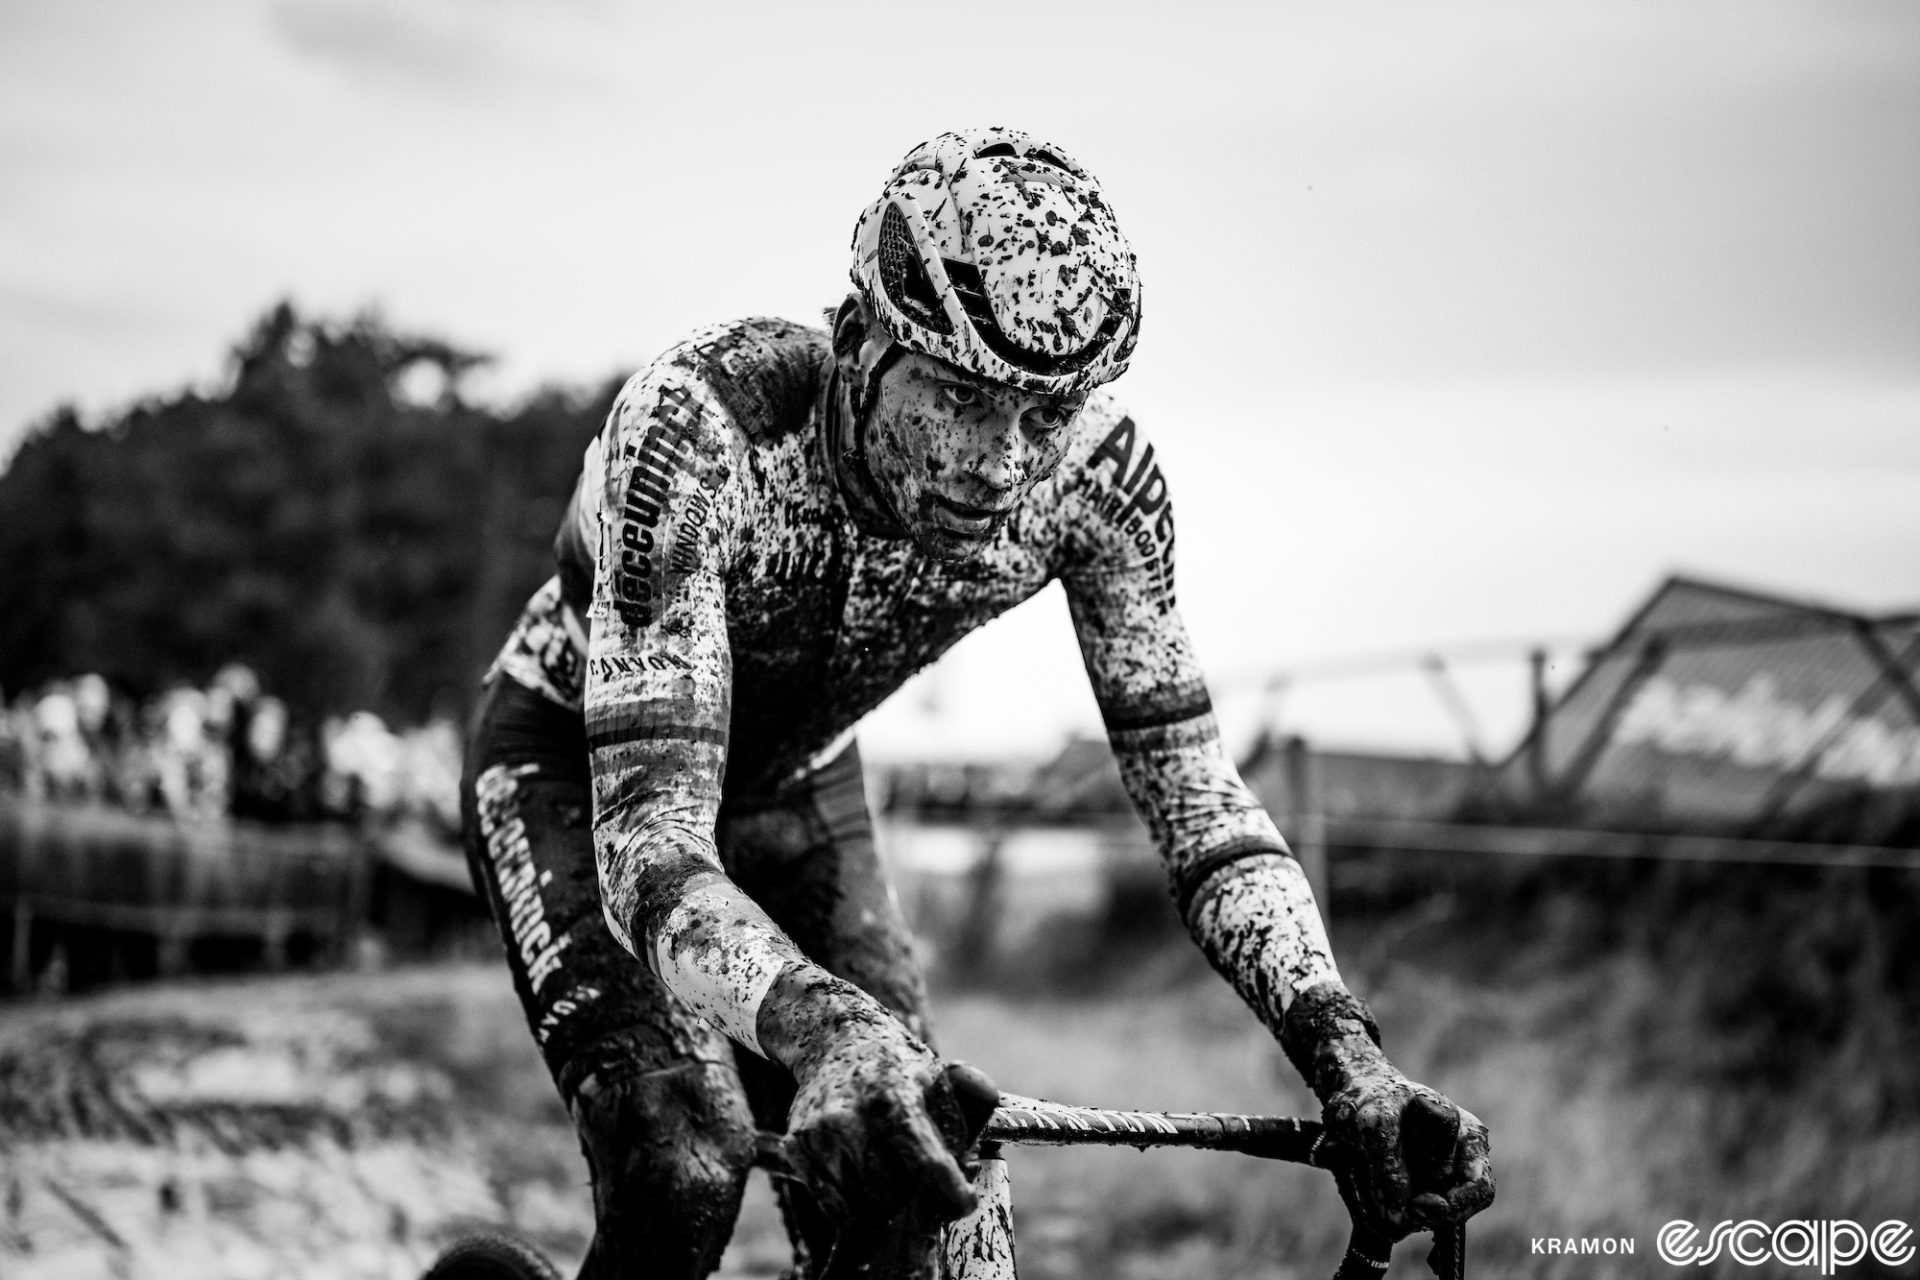 Mathieu van der Poel rides to a solo victory at the Grand Prix Sven Nys. The black and white image shows him close up, his World Champion kit covered in mud, with an intense focus on his face.